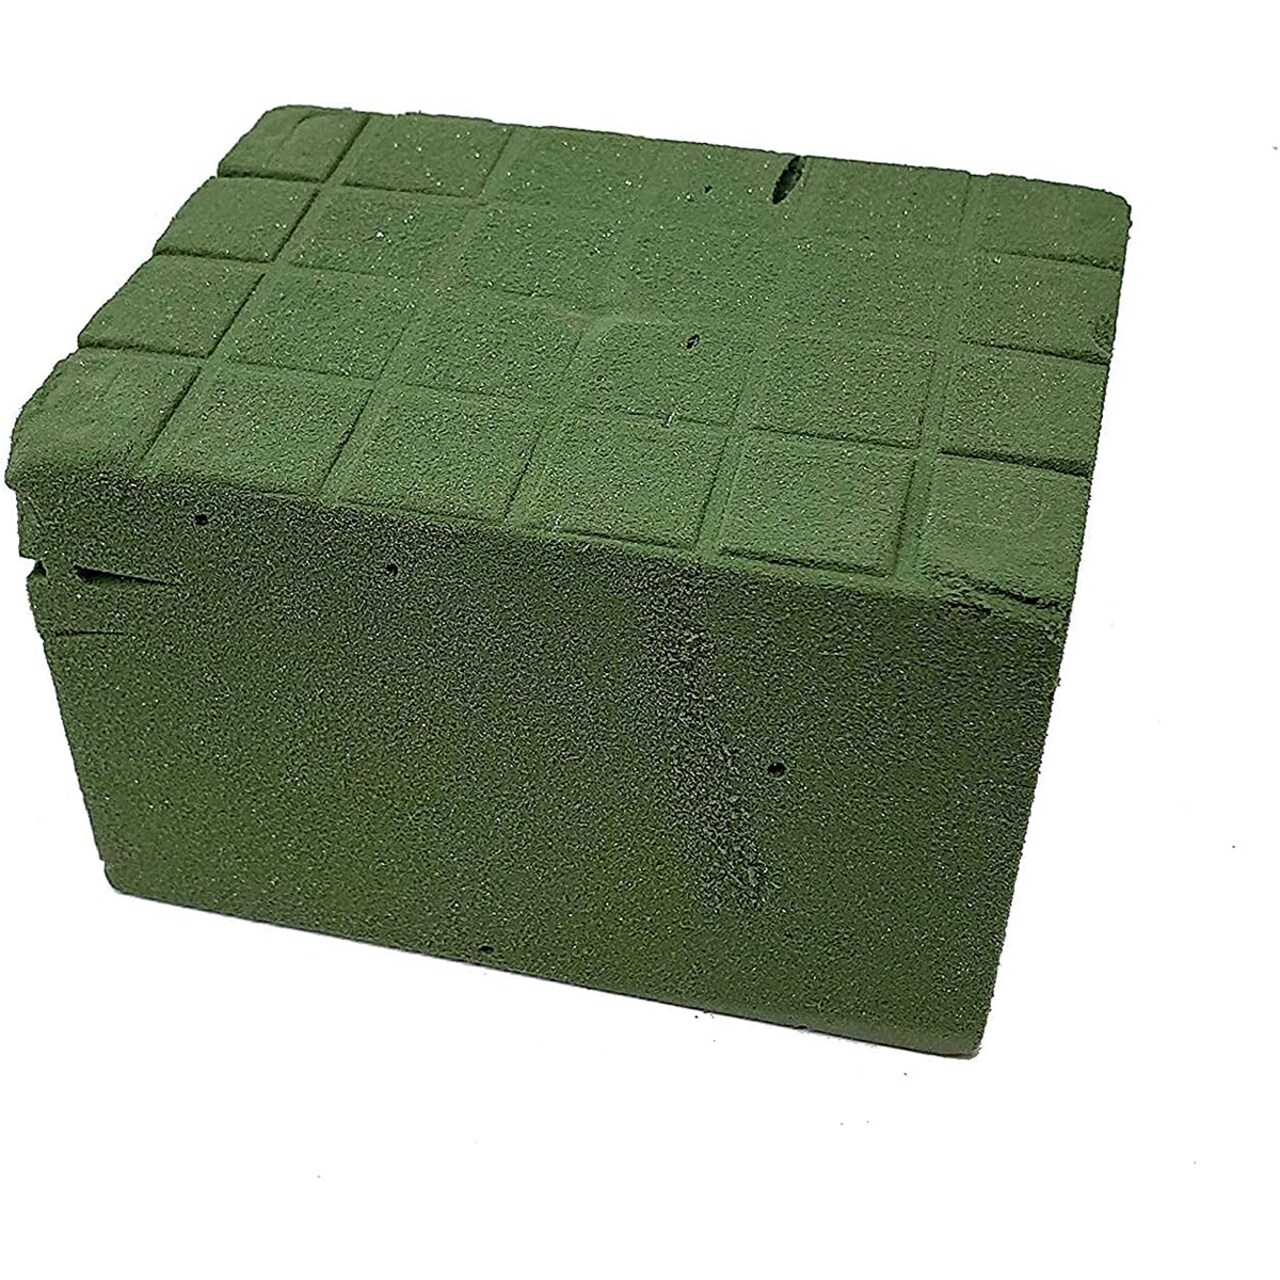 Wet Floral Foam Brick with Tray 1 pack